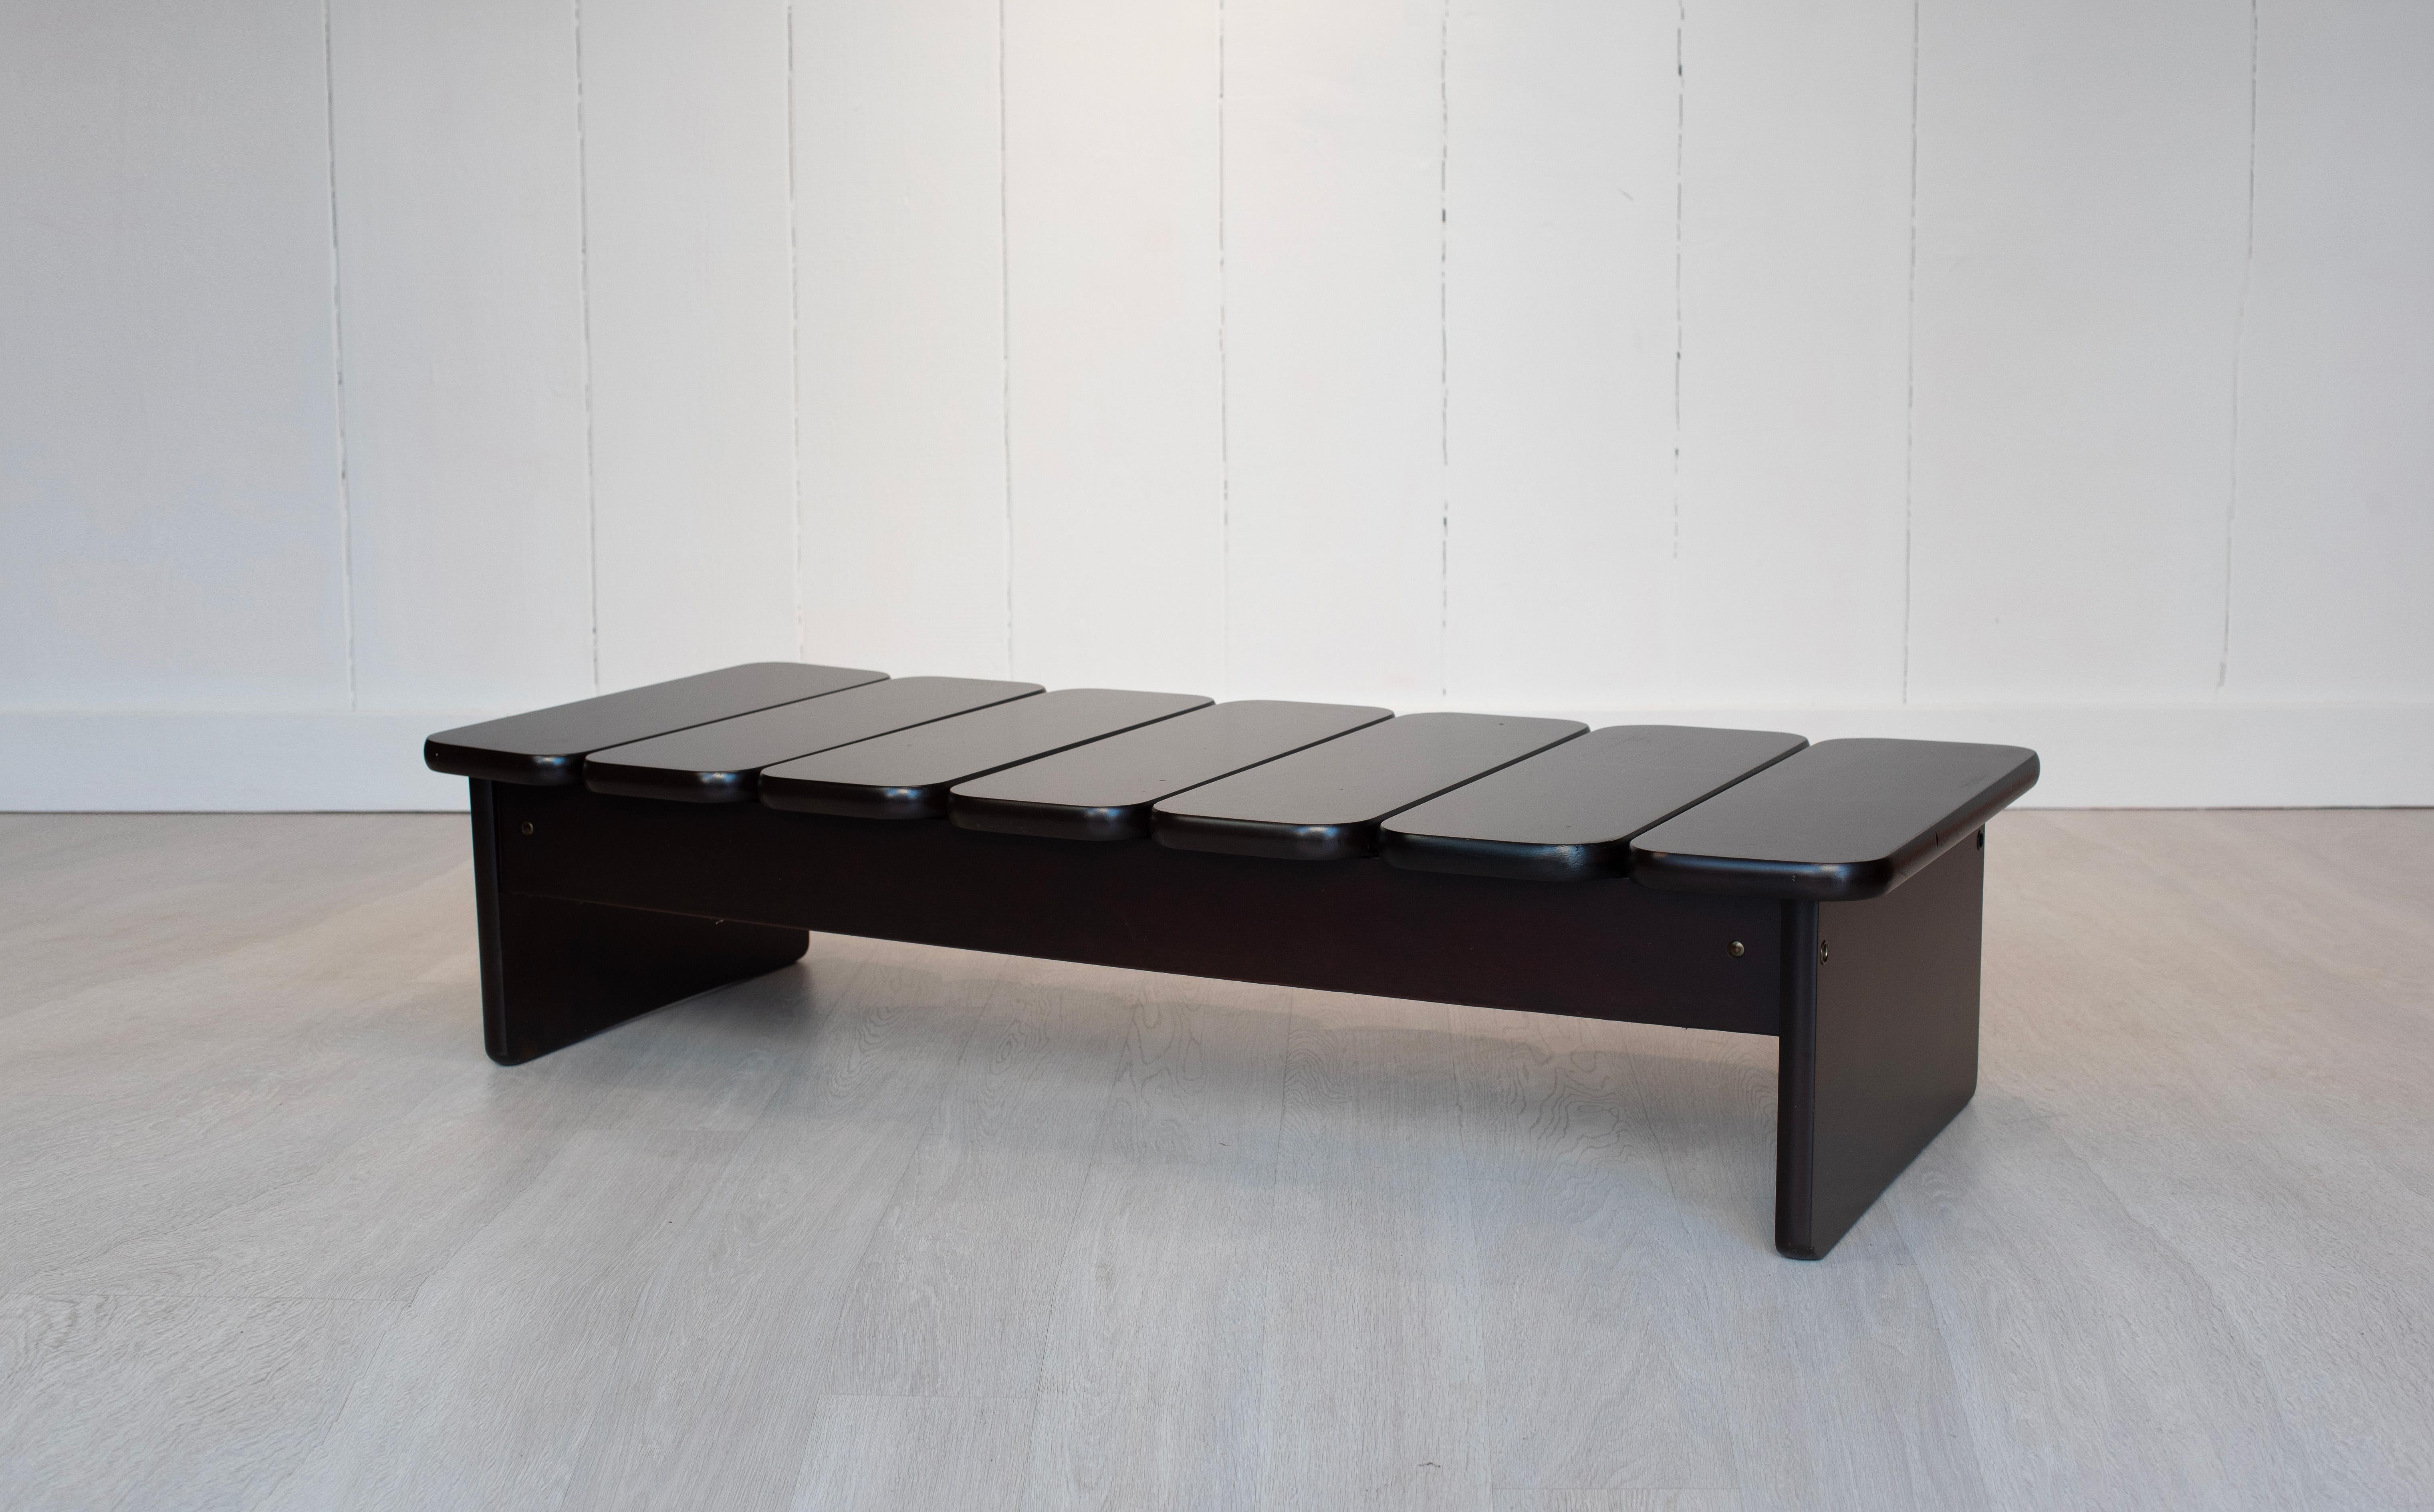 This solid wood bench/coffee table by Geraldo de Barros for 